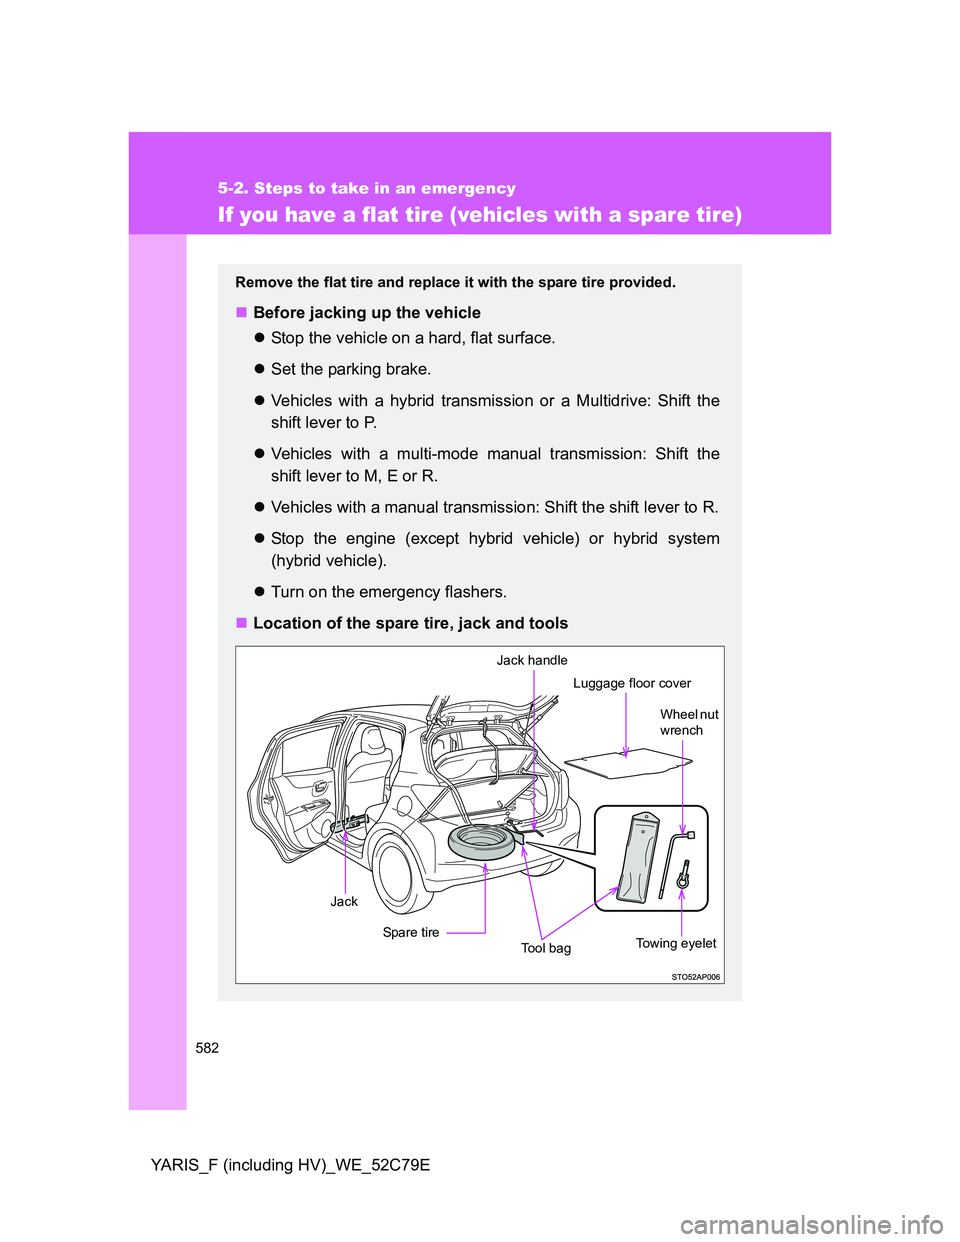 TOYOTA YARIS 2012  Owners Manual 582
5-2. Steps to take in an emergency
YARIS_F (including HV)_WE_52C79E
If you have a flat tire (vehicles with a spare tire)
Remove the flat tire and replace it with the spare tire provided.
Before